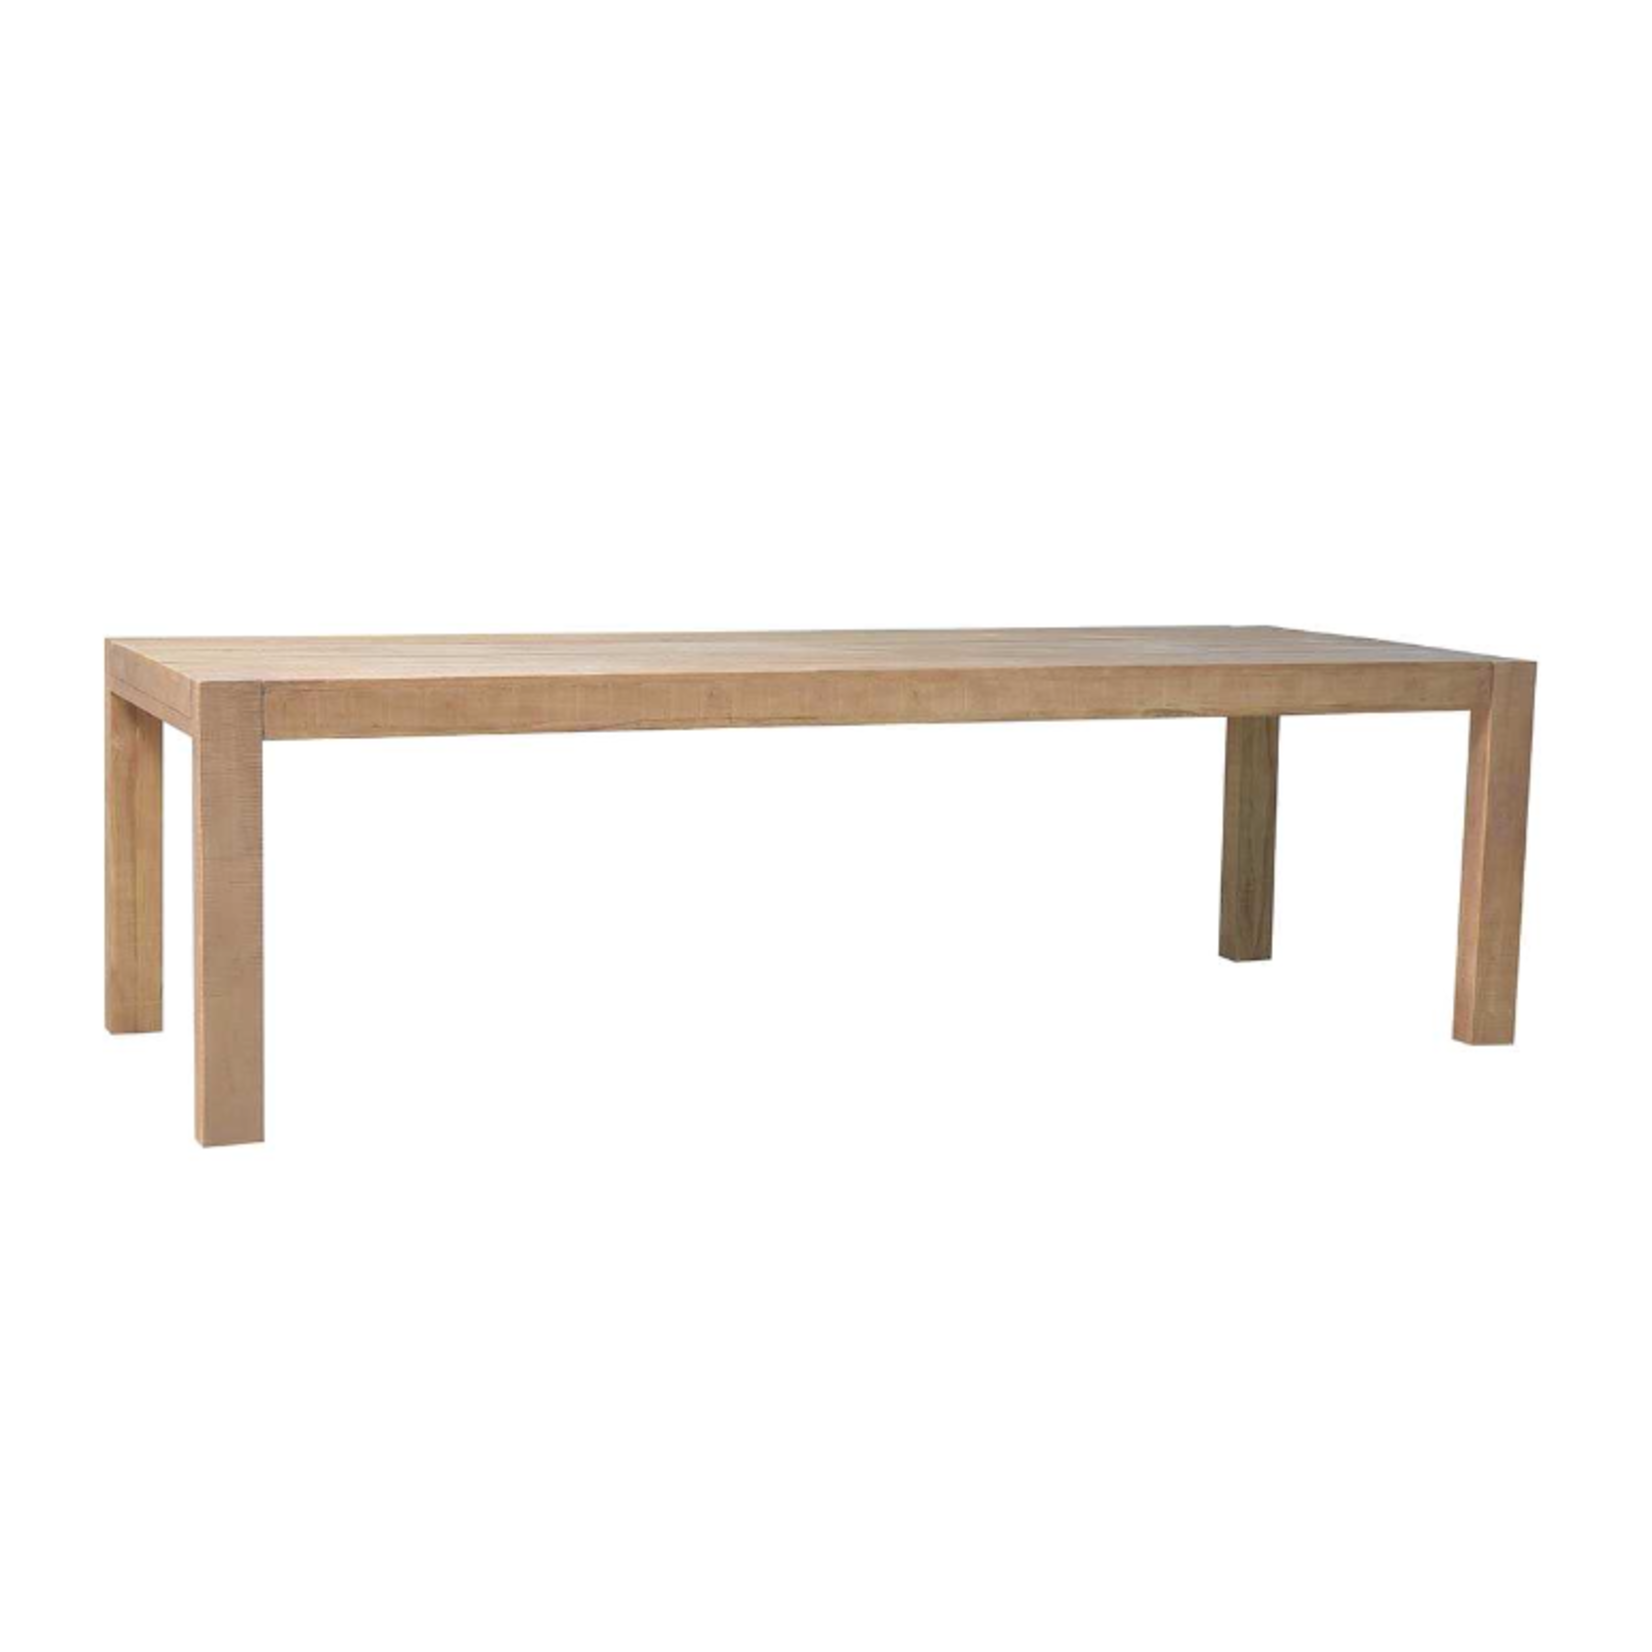 Outside The Box 102x39 Tuscan Solid Teak Wood Rectangular Dining Table In Natural - TNT